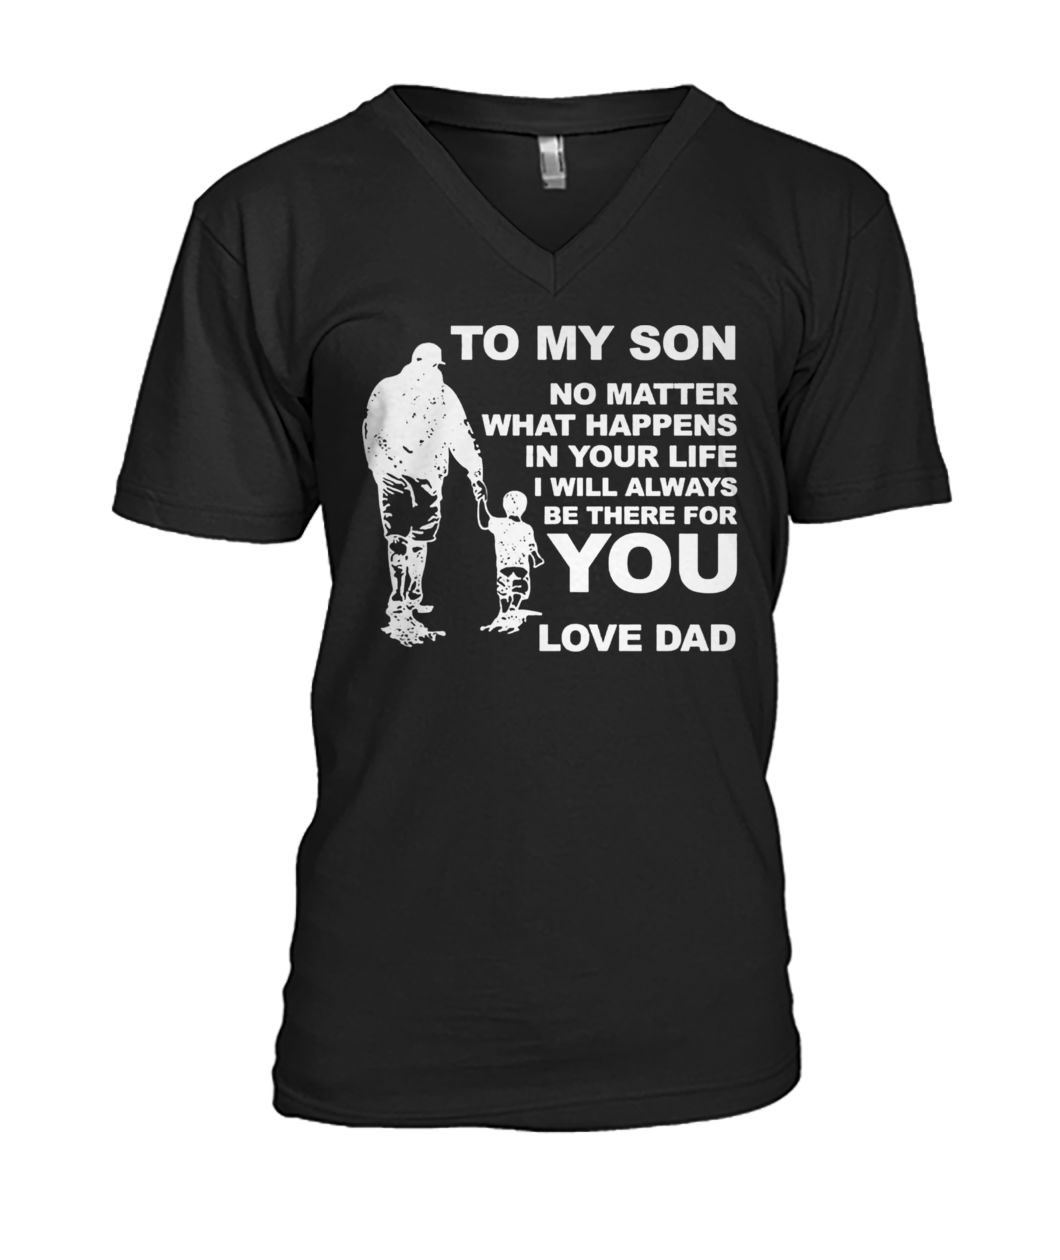 To my son no matter what happens in your life I will always be there for you love dad mens v-neck